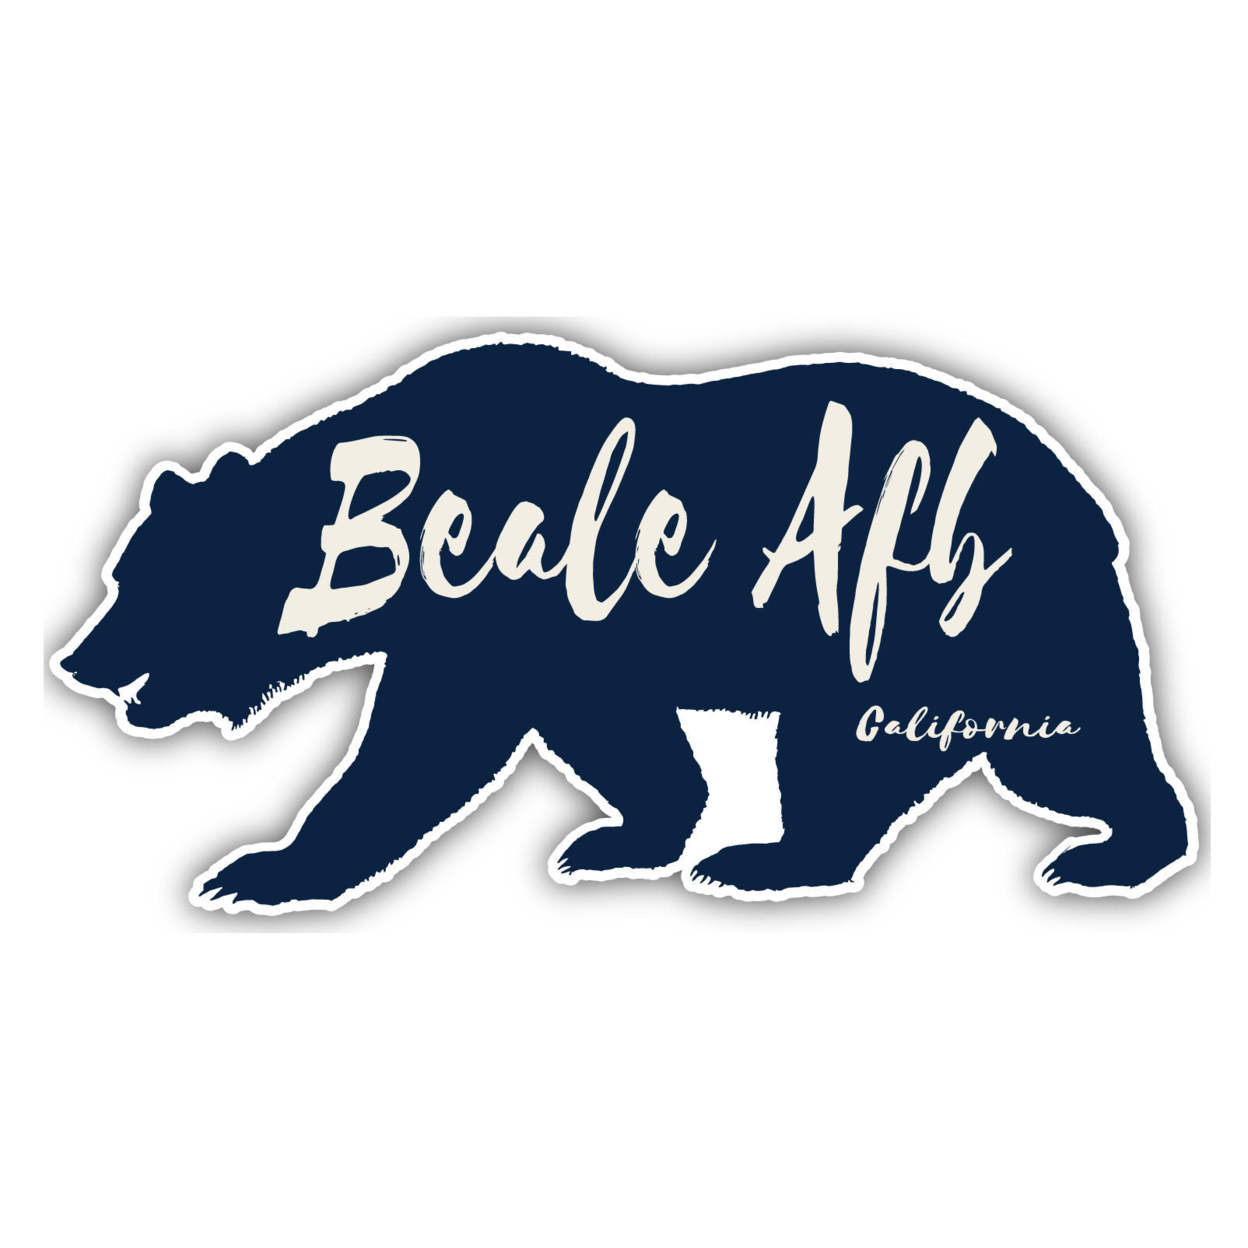 Beale AFB California Souvenir Decorative Stickers (Choose Theme And Size) - 4-Pack, 8-Inch, Bear